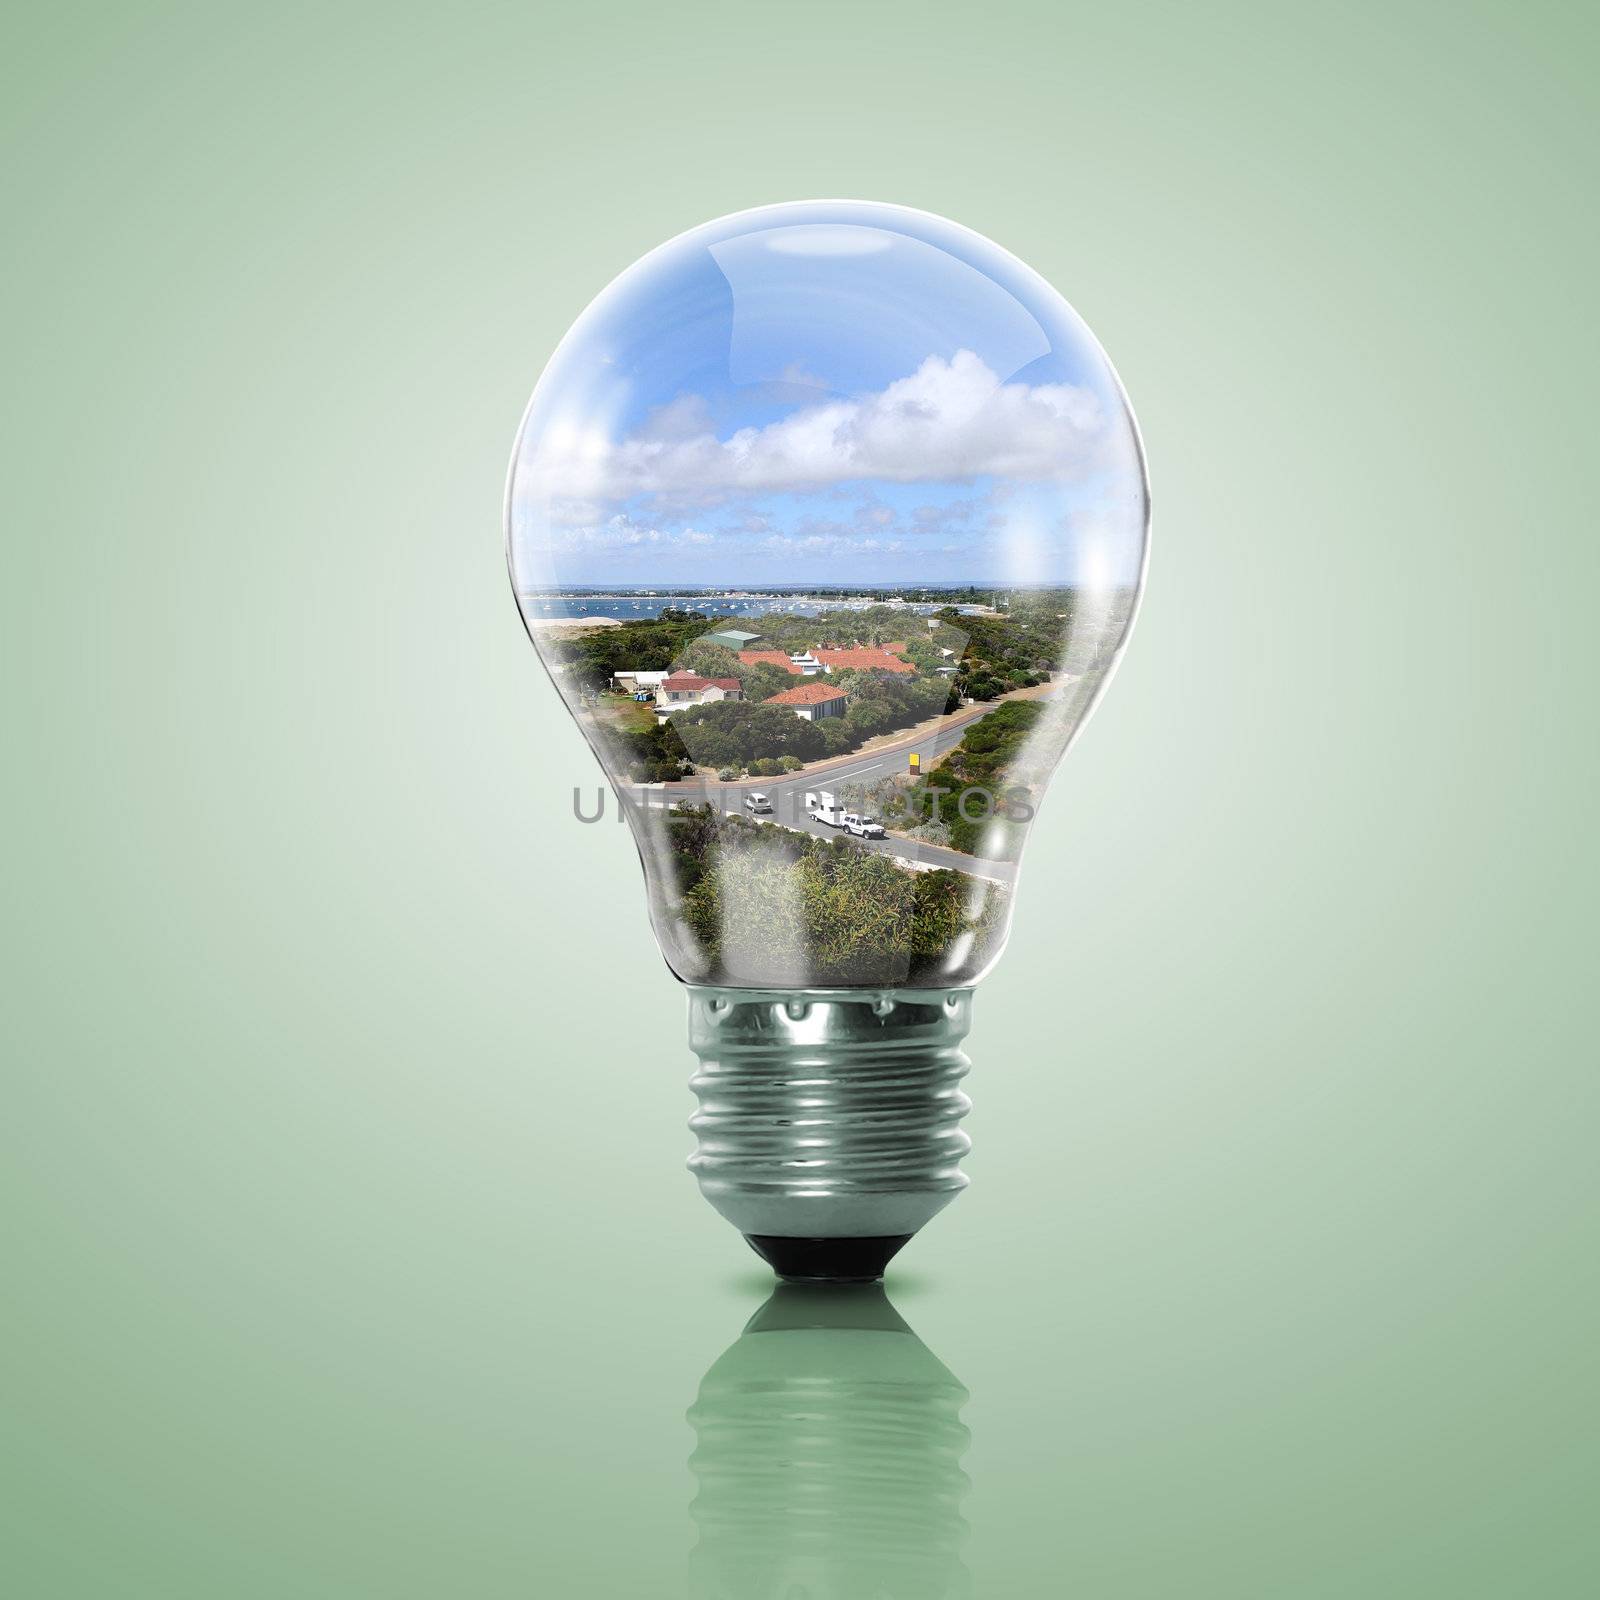 Electric light bulb and a plant inside it by sergey_nivens